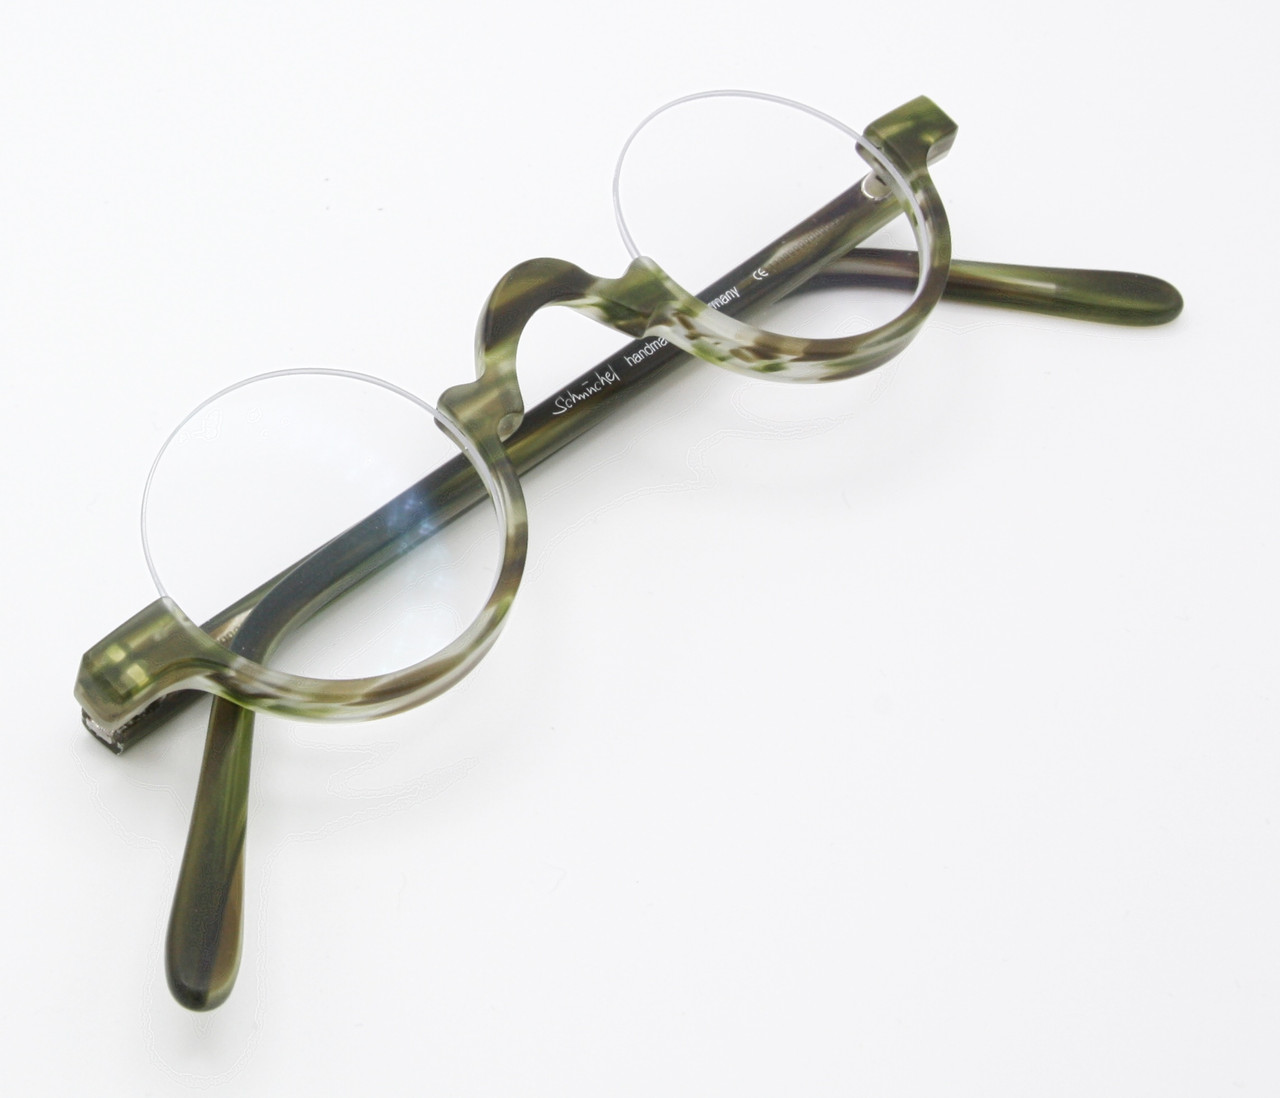 Lower half rimmed green acetate glasses, light and comfortable to wear, at www.theoldglassesshop.co.uk